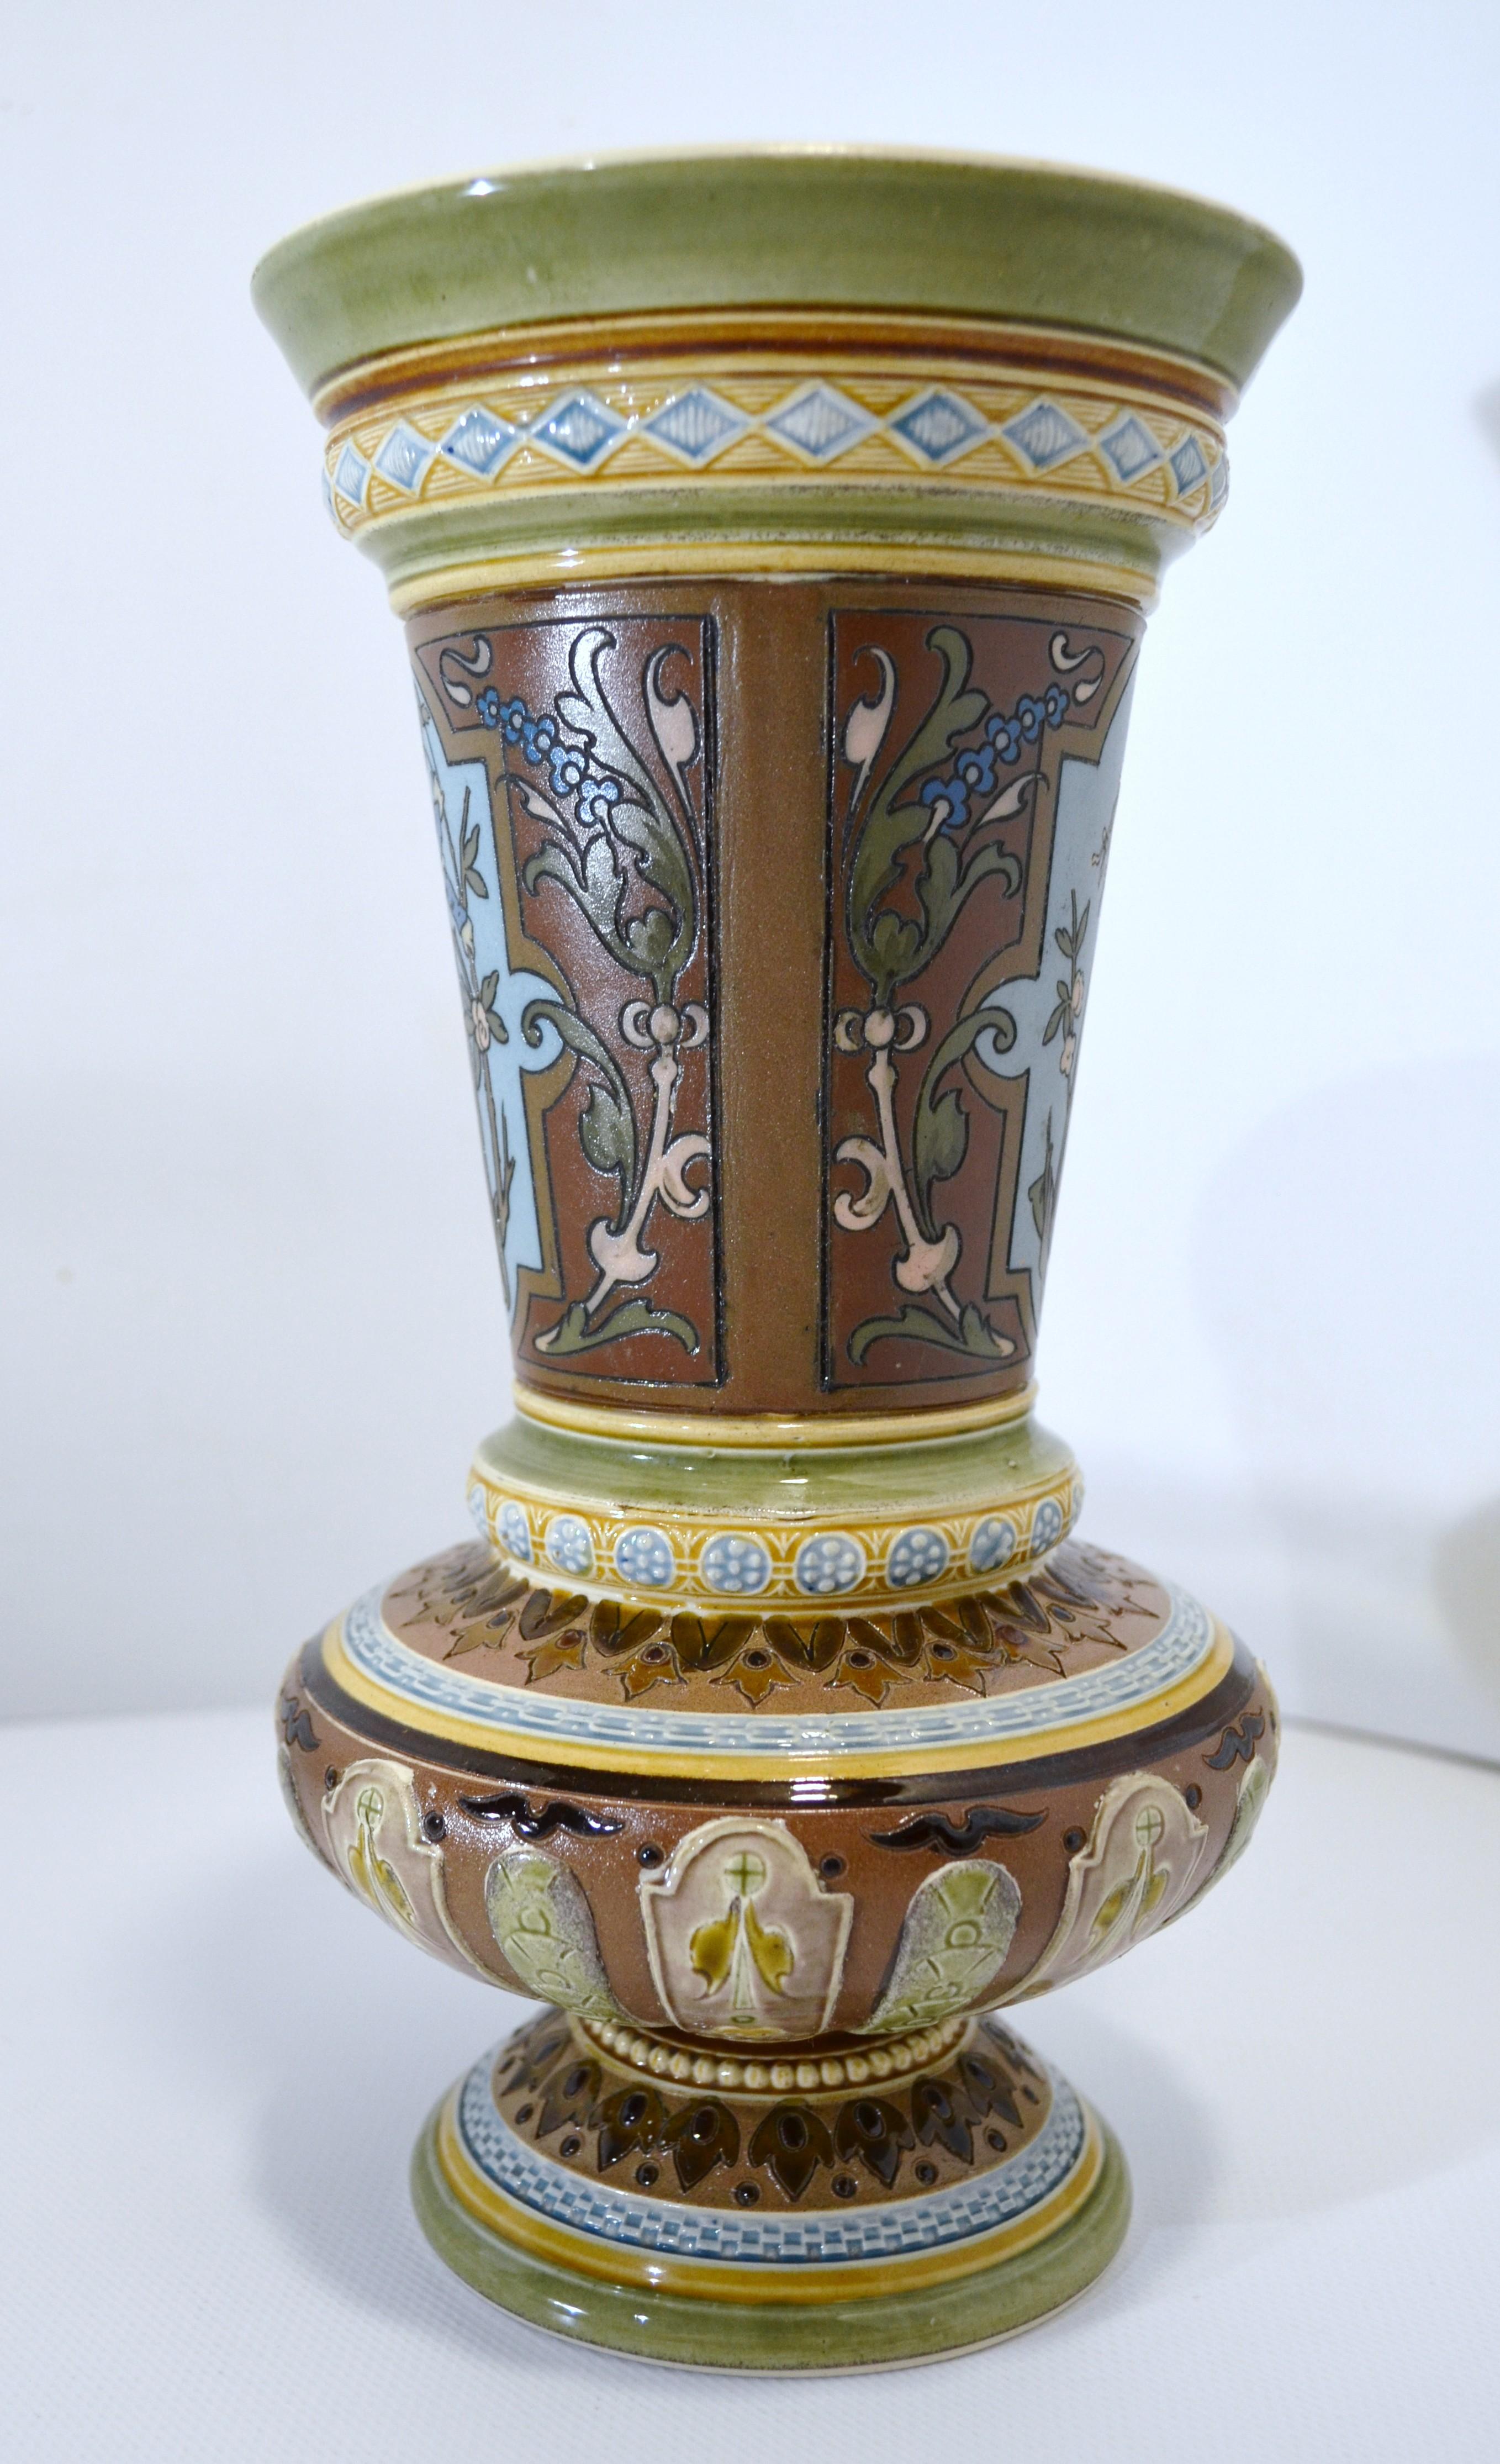 Romantic Villeroy and Boch Mettlach 1890 1900 Mosaic Ceramic Vase Decorated with Women For Sale